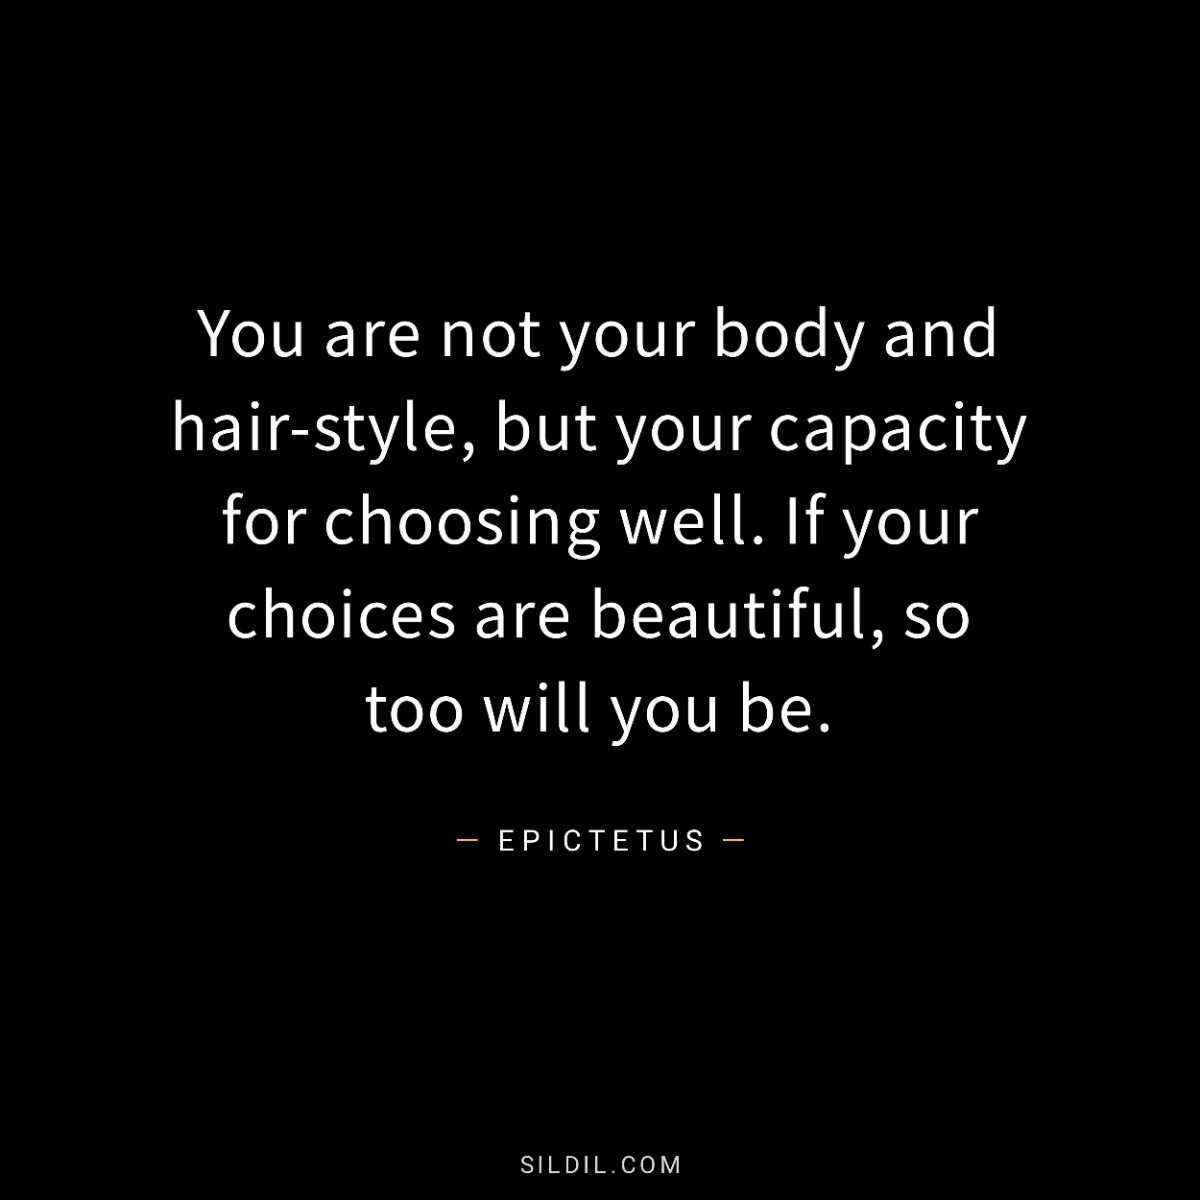 You are not your body and hair-style, but your capacity for choosing well. If your choices are beautiful, so too will you be.